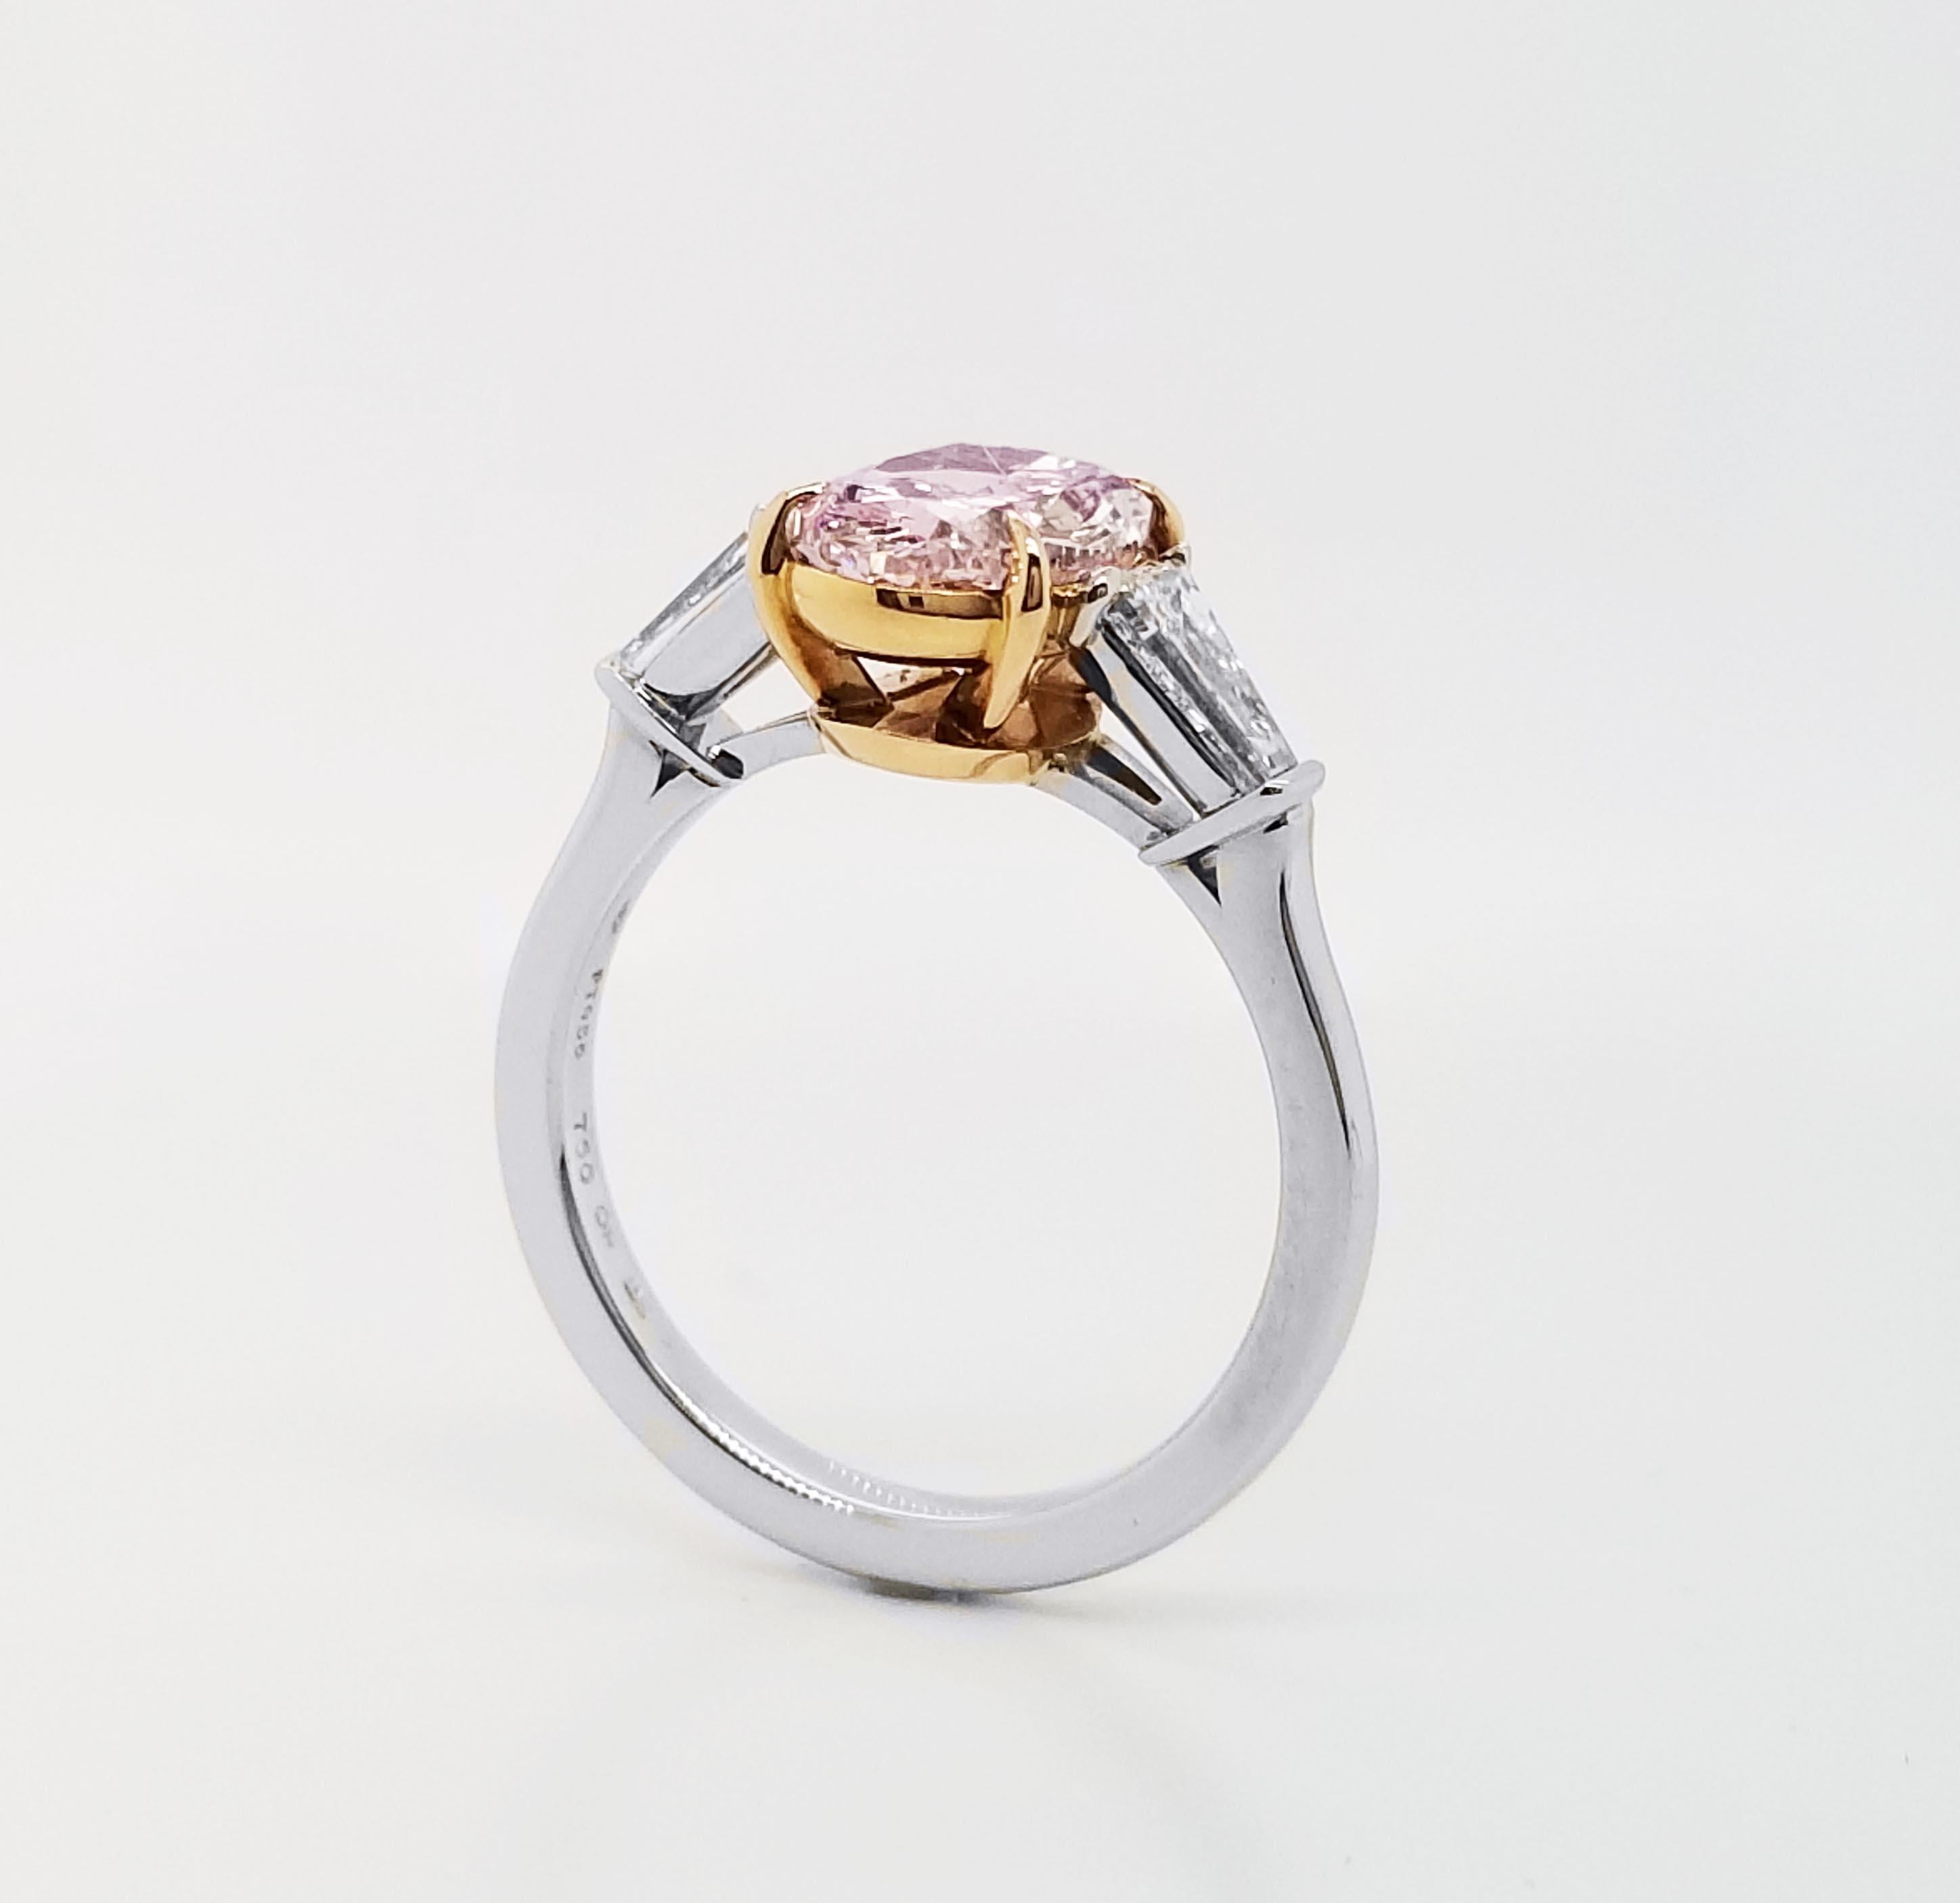 SCARSELLI 2 Carat Fancy Purple Pink Diamond Solitaire Ring GIA For Sale 1